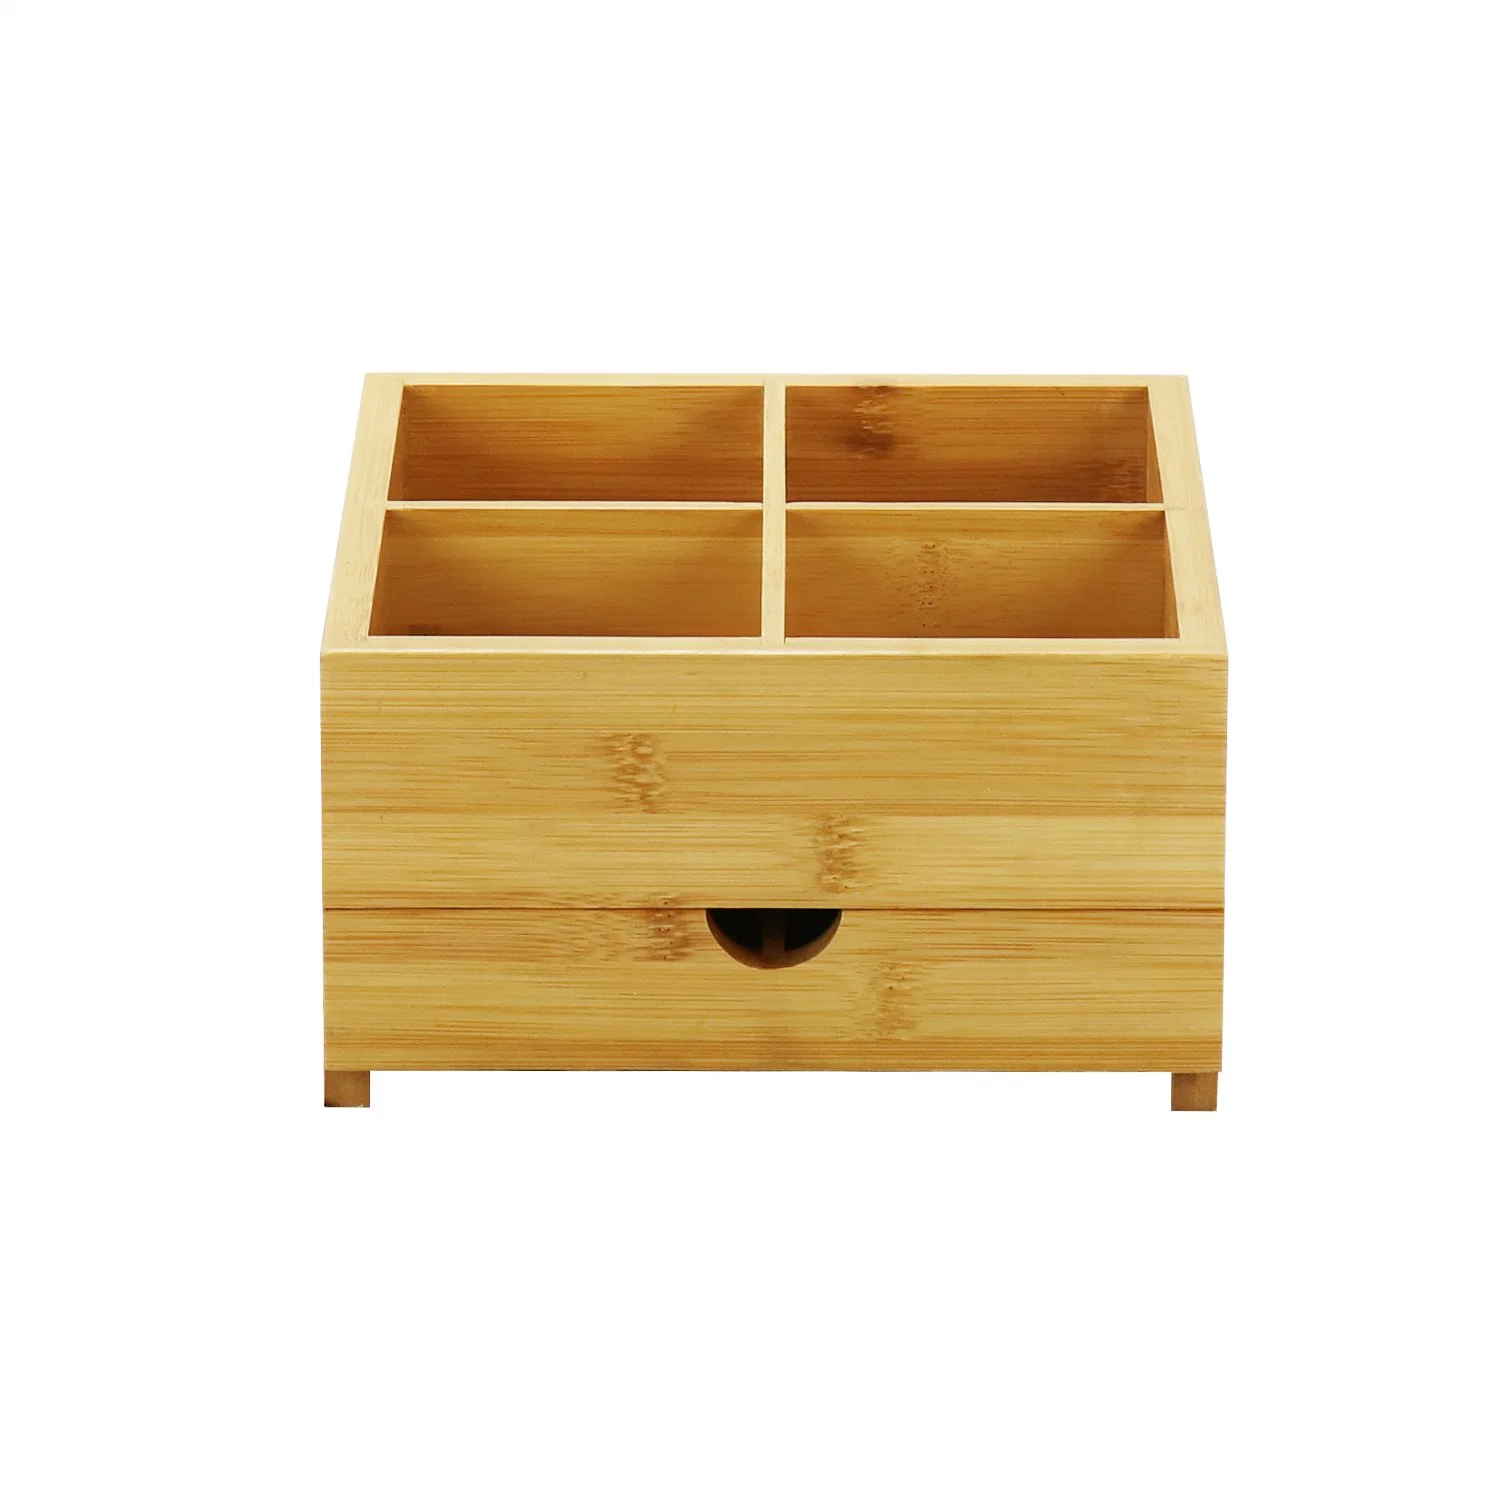 Wood Storage Boxes Wooden Treasure Chest Jewelry Trinkets Rustic Organizer Case Container